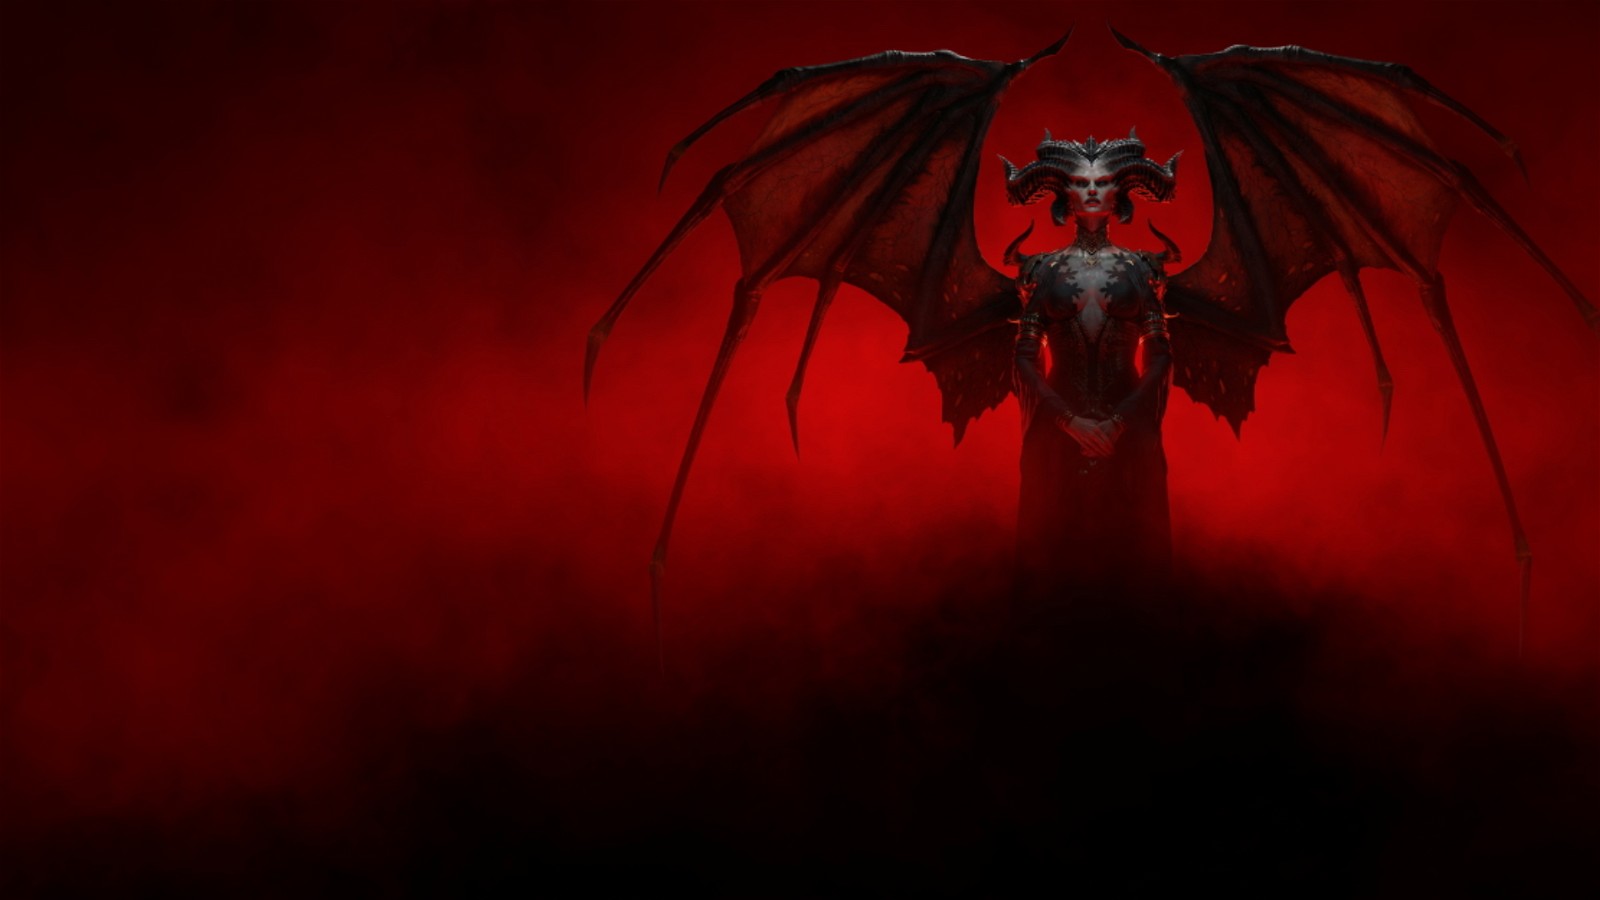 Diablo 4 Is Coming to Modern Warfare 2 and Warzone 2